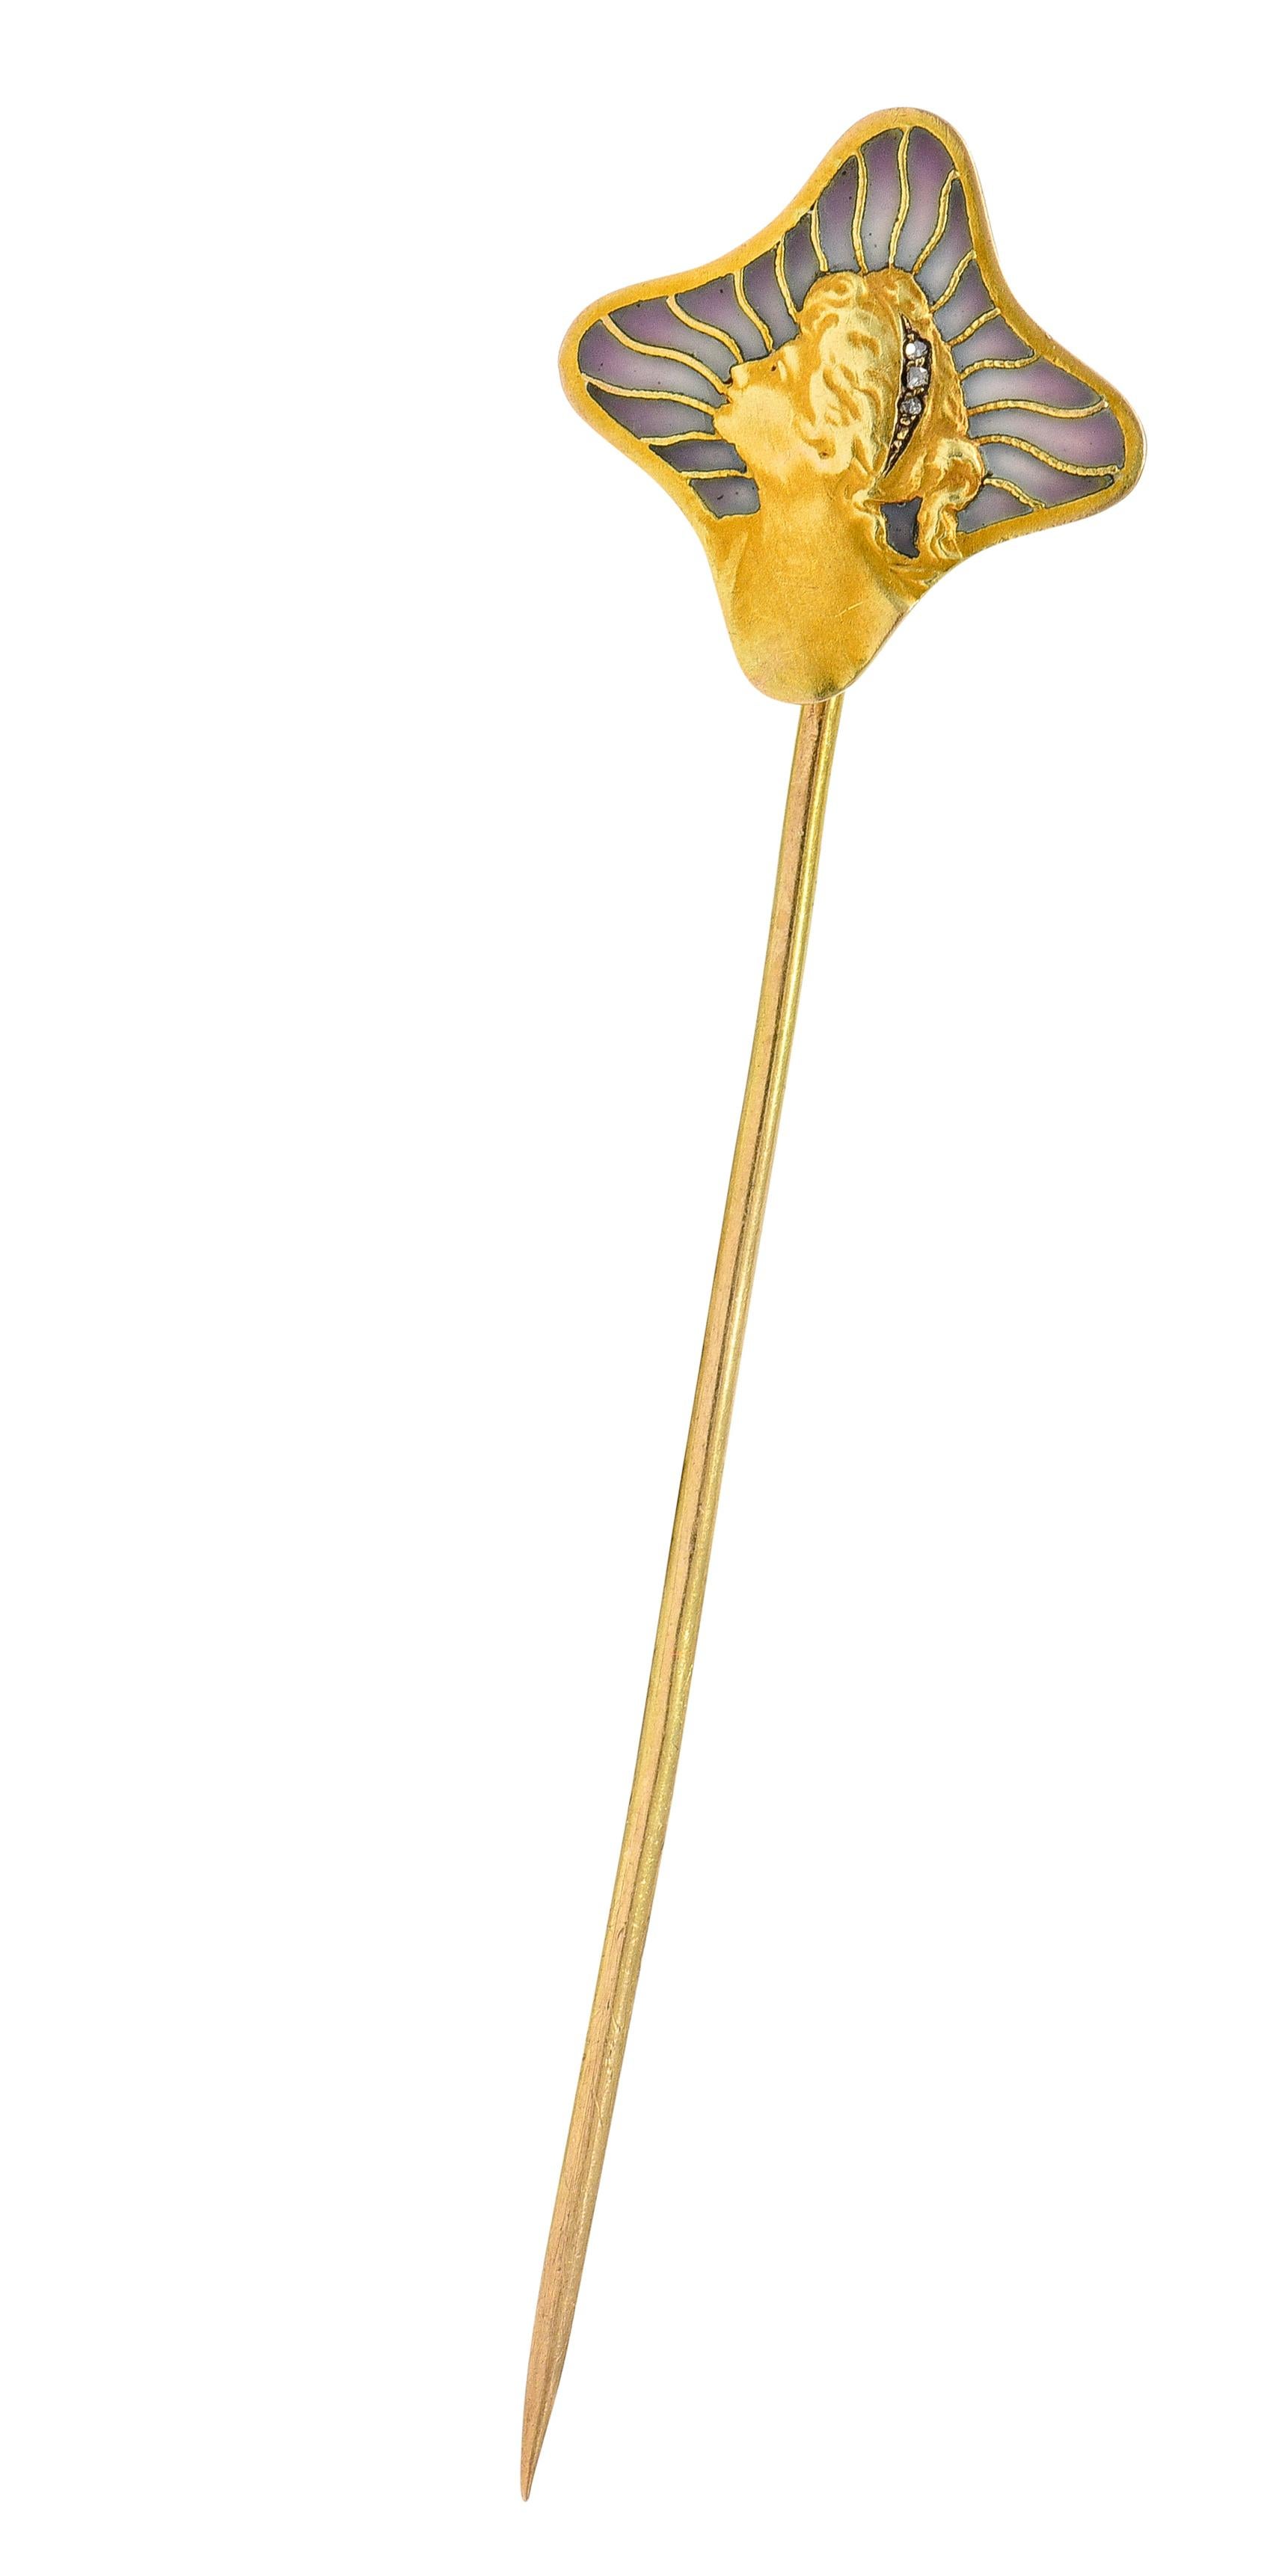 Stickpin has a quatrefoil shaped head and depicts the matte gold profile of a Gibson Girl

Highly rendered with tousled tresses accented by rose cut diamonds

With a radiated background design glossed with translucent plique-a-jour enamel

Ombrè